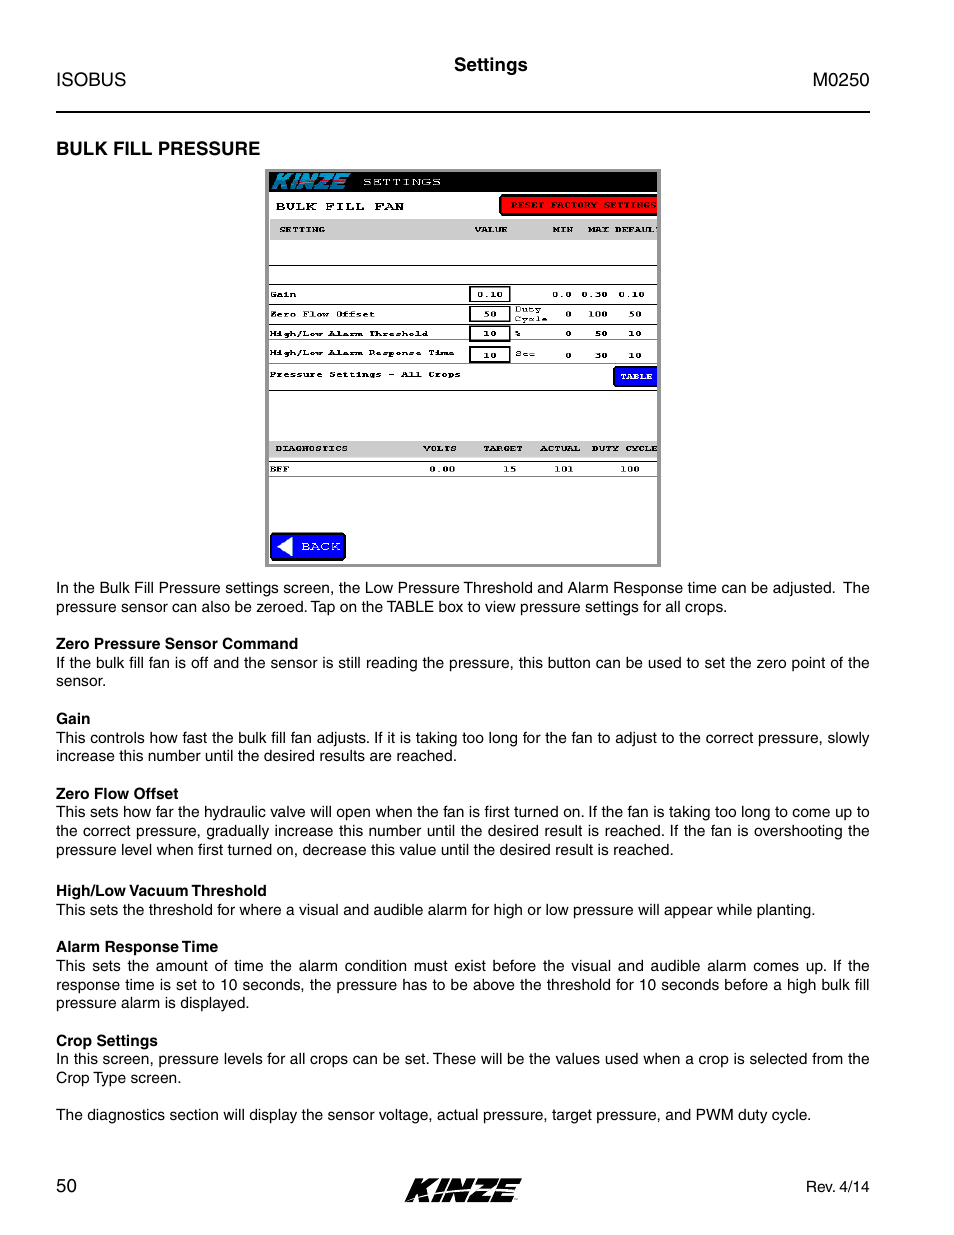 Bulk fill pressure | Kinze ISOBUS Electronics Package (4900) Rev. 4/14 User Manual | Page 54 / 60